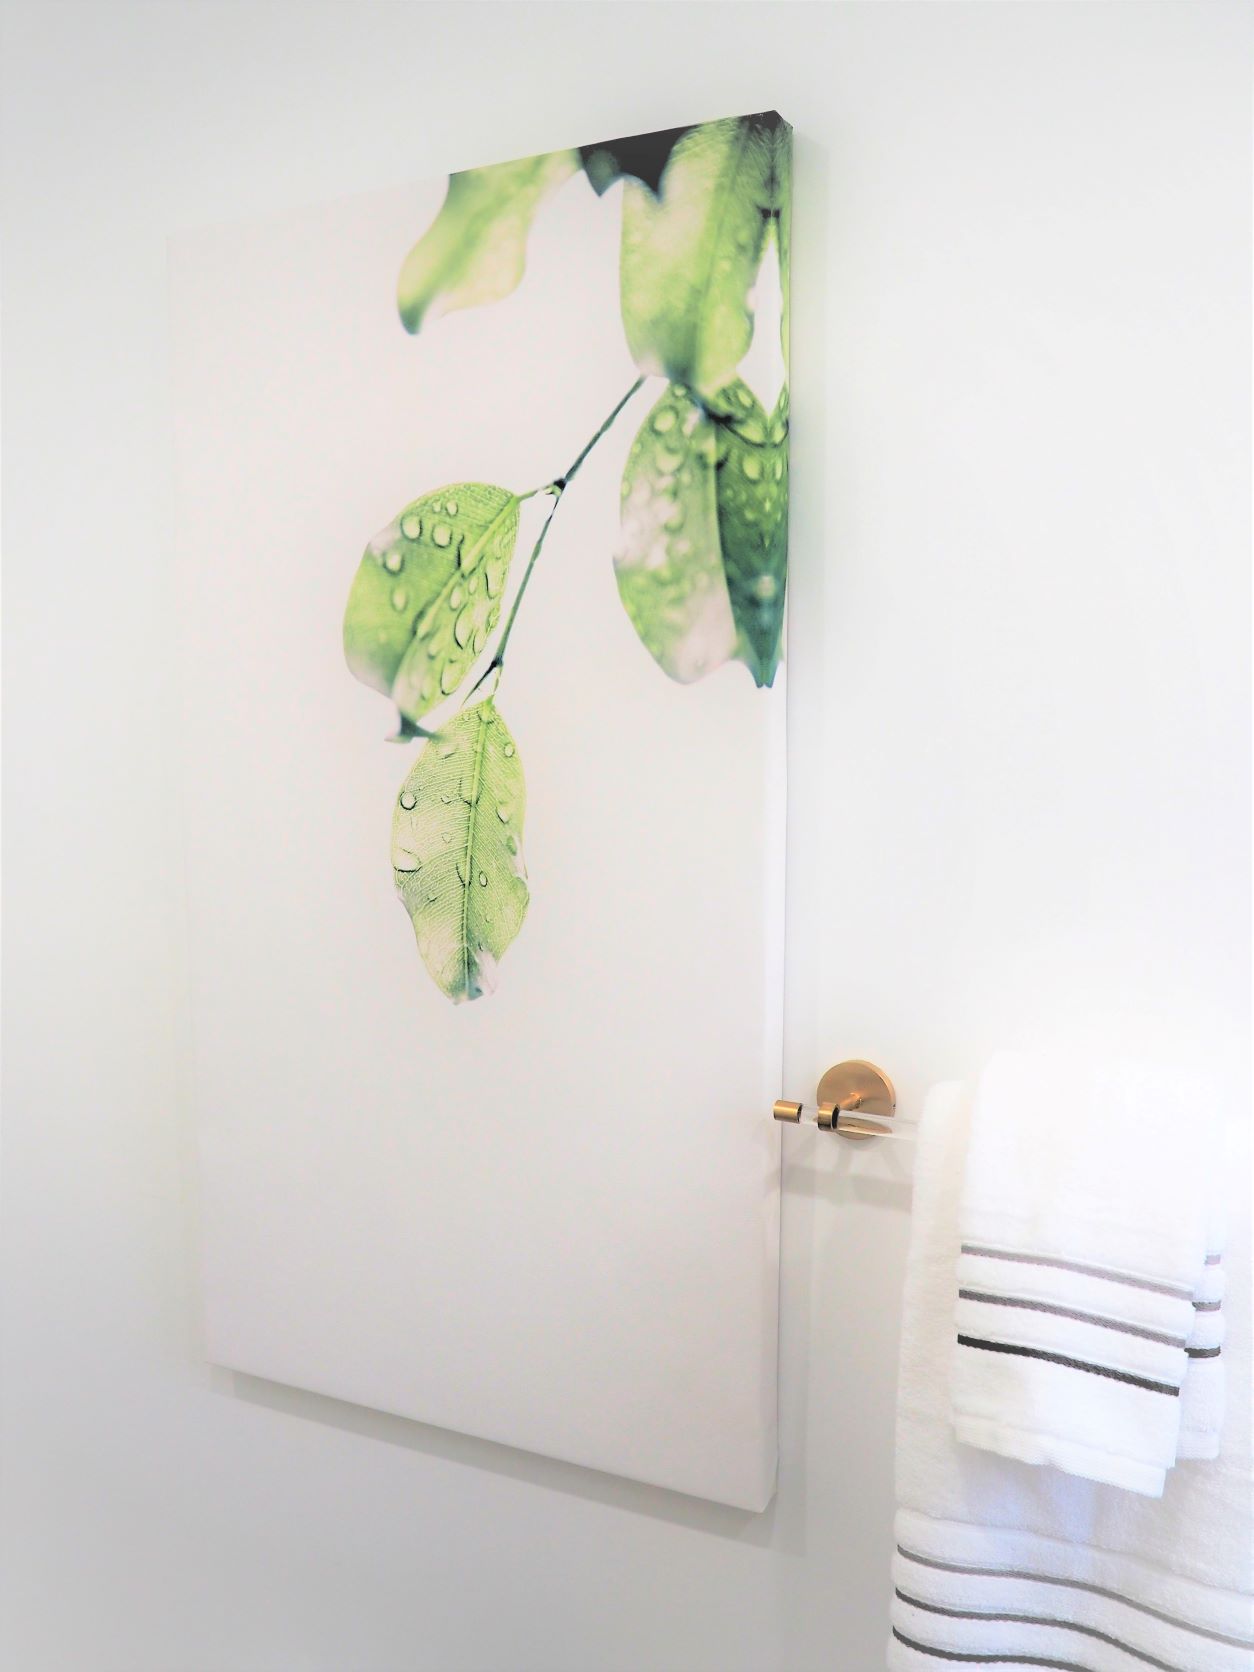 Artwork with Leaves brings a touch of Nature into the Spa Bathroom